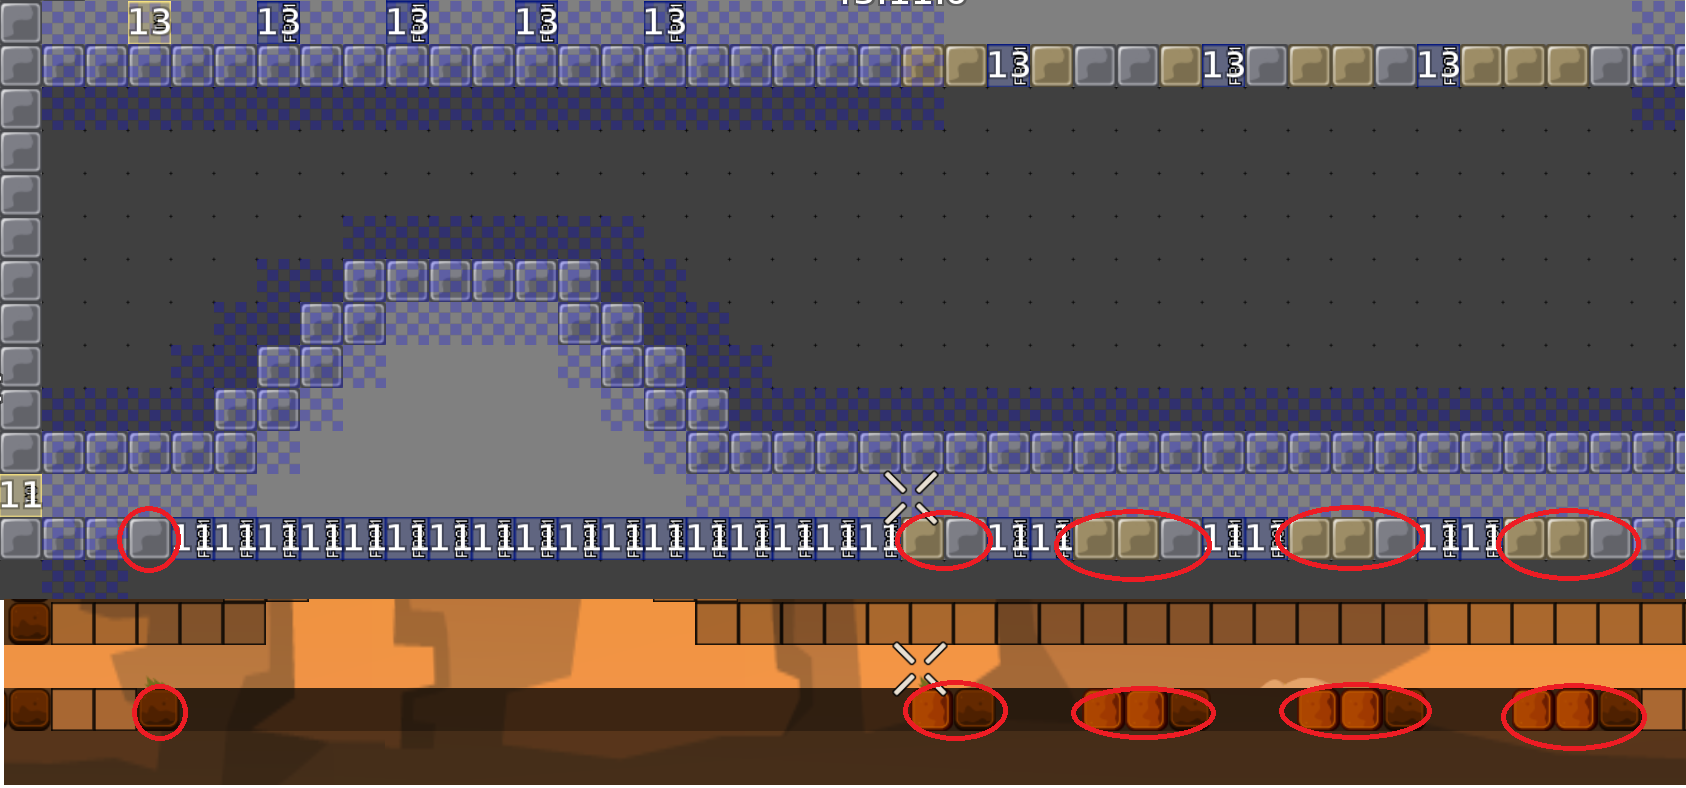 You can hook through all of them. Maybe delete the hookthrough tiles above.